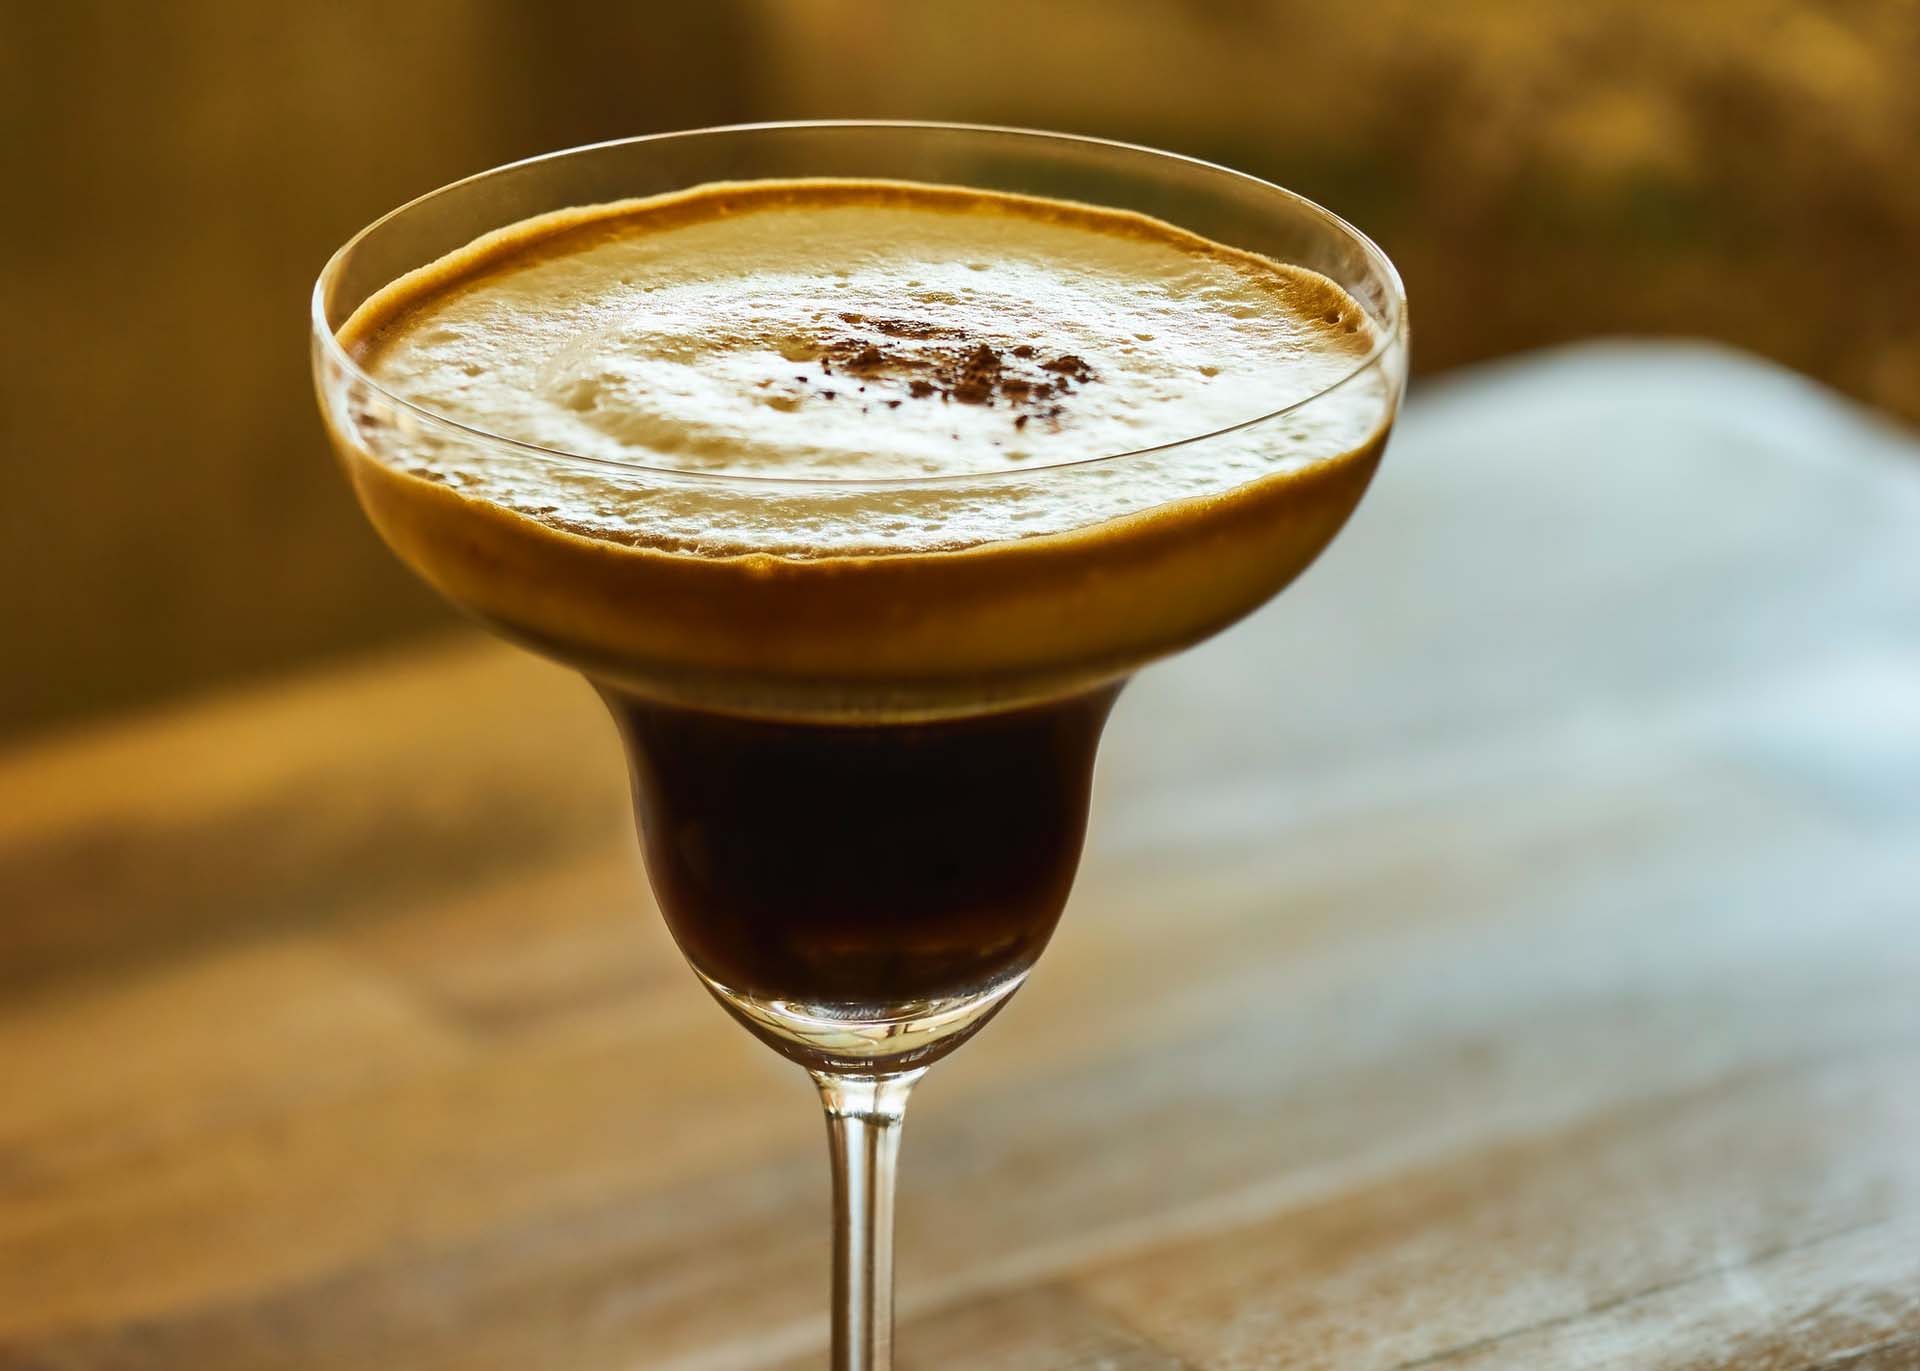 A rum and coffee cocktail to sip on this fall season